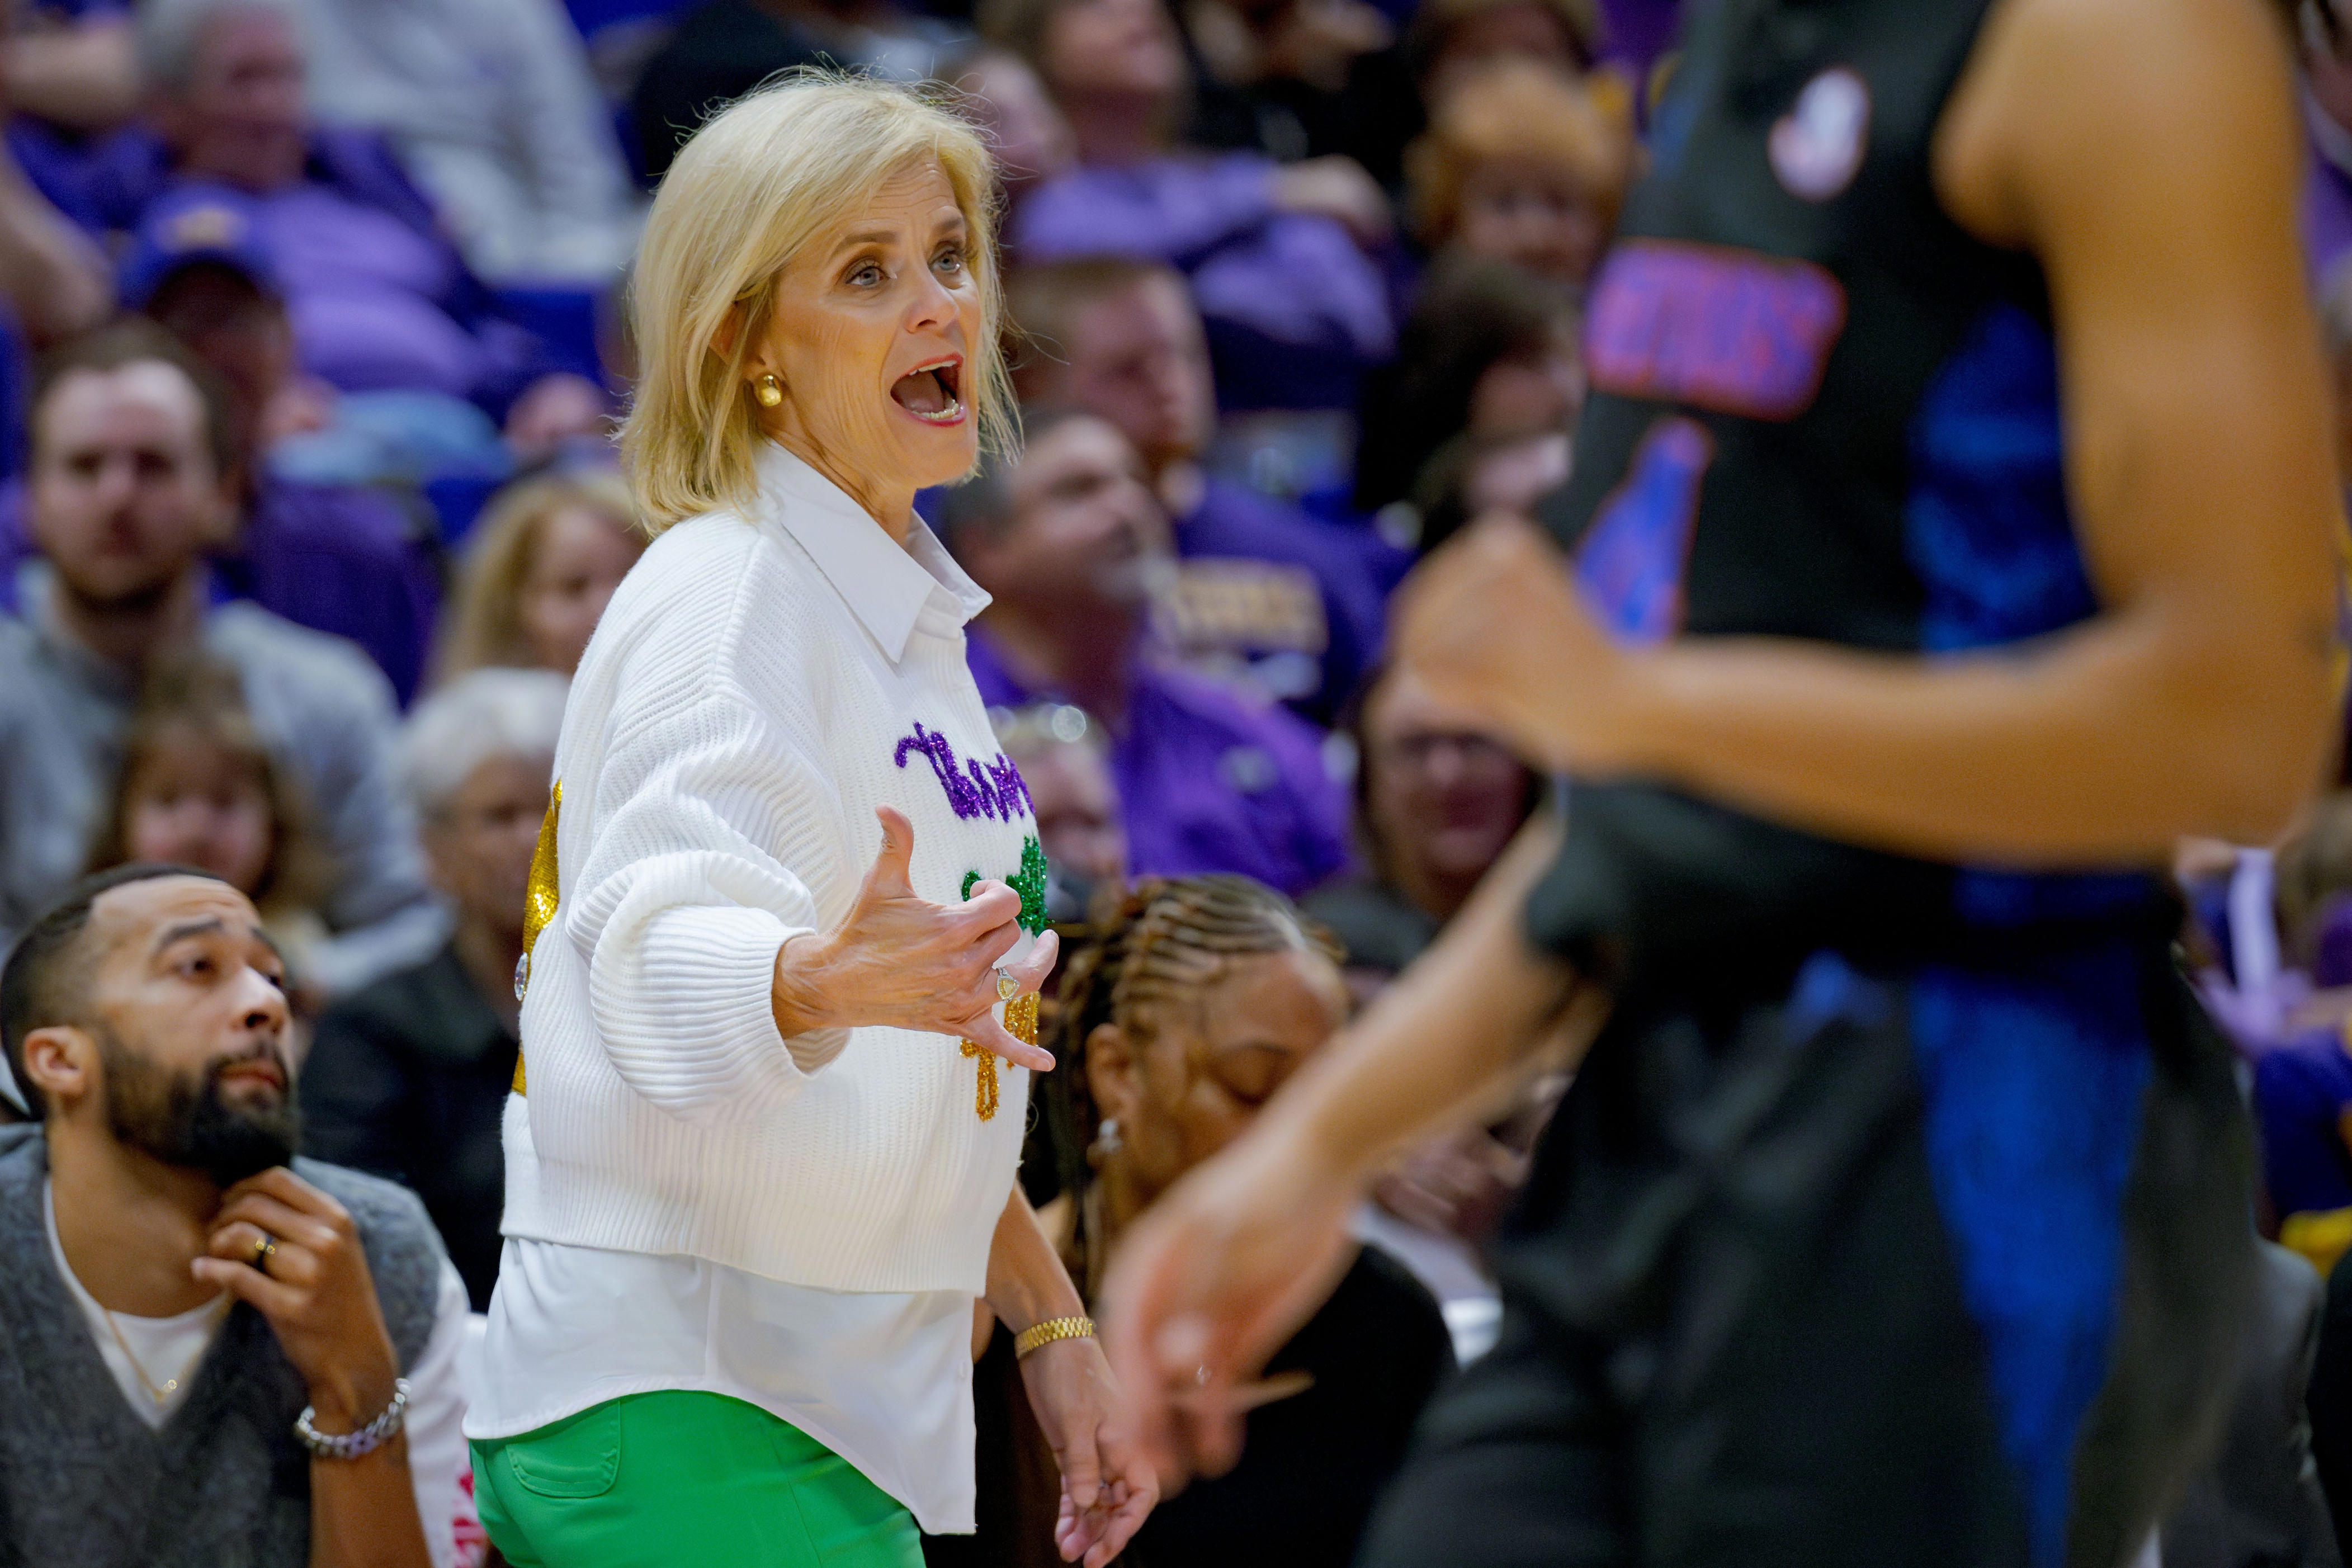 lsu women's basketball practiced without the ball after losing streak